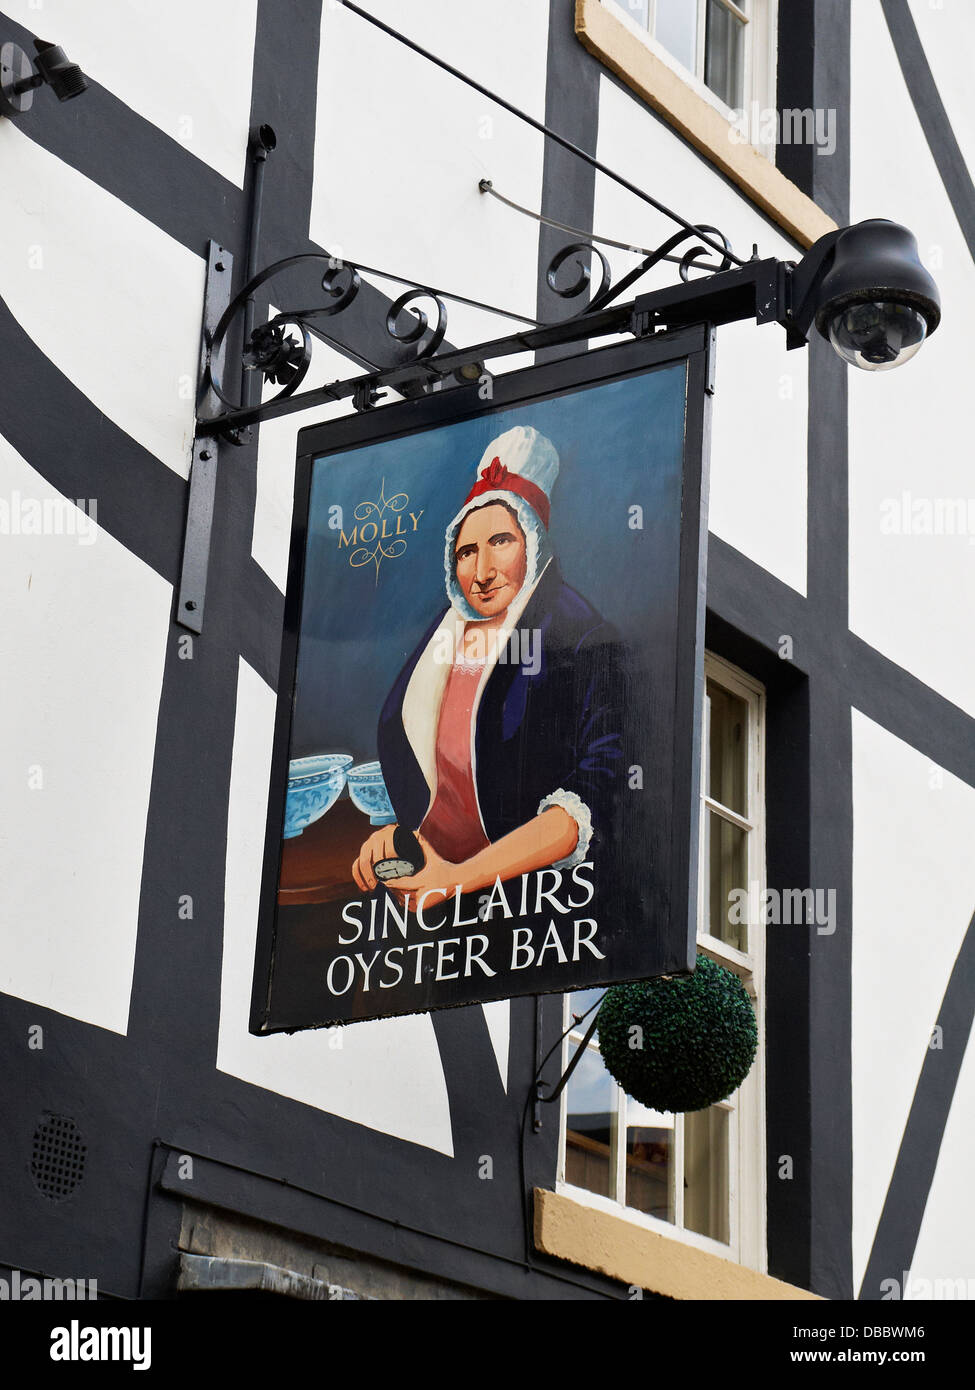 Molly as used at Sinclairs Oyster bar pub sign in Manchester UK Stock Photo